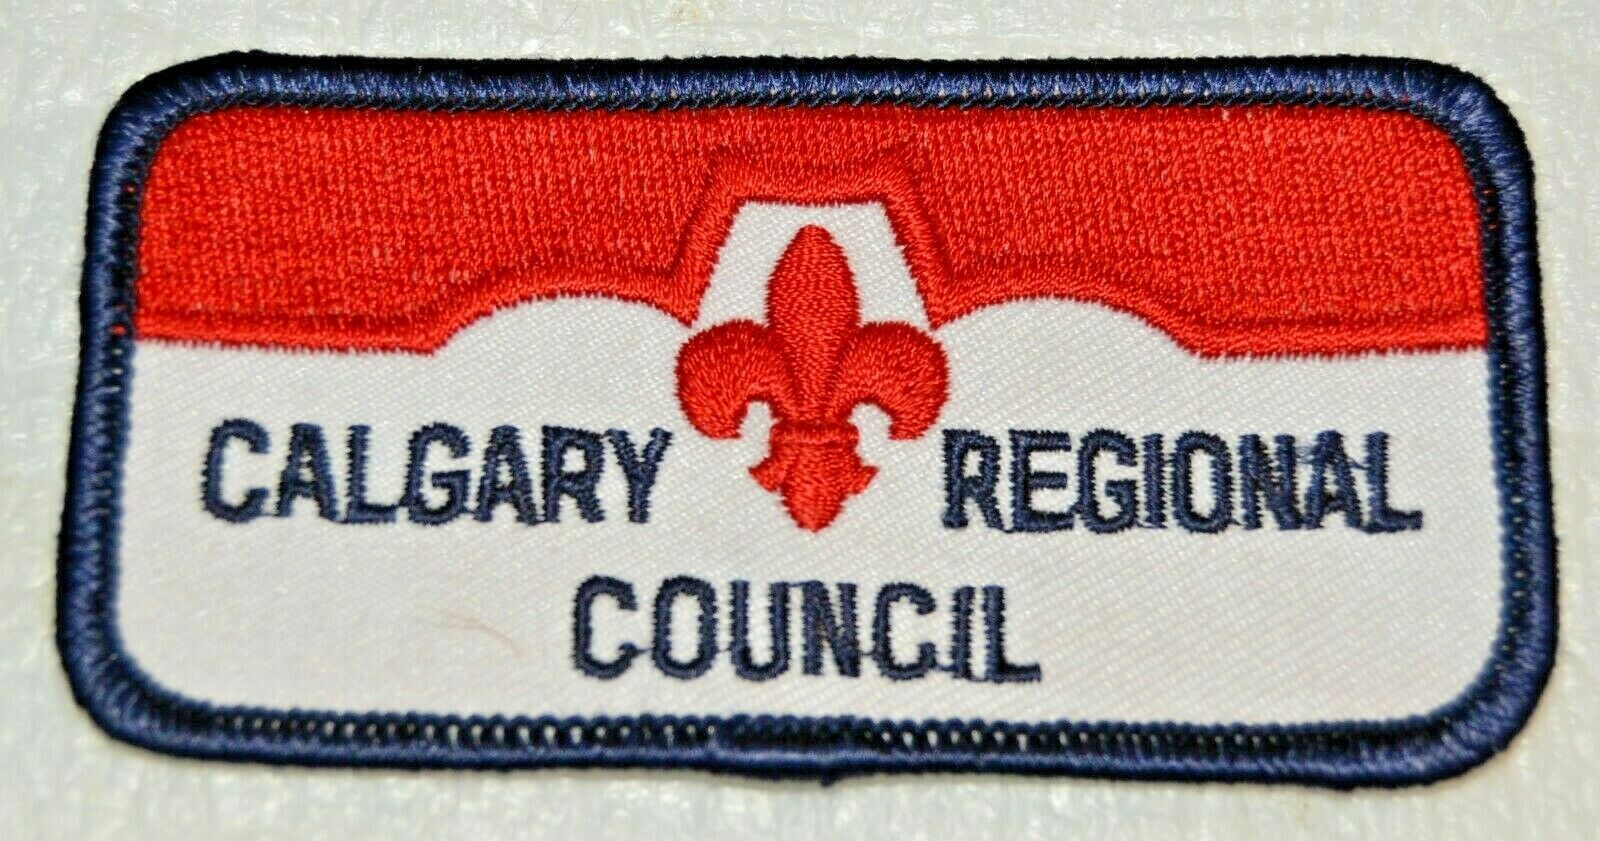 Calgary Regional Council Red Scout Emblem Boy Scout Badge Canadian (abc1f)